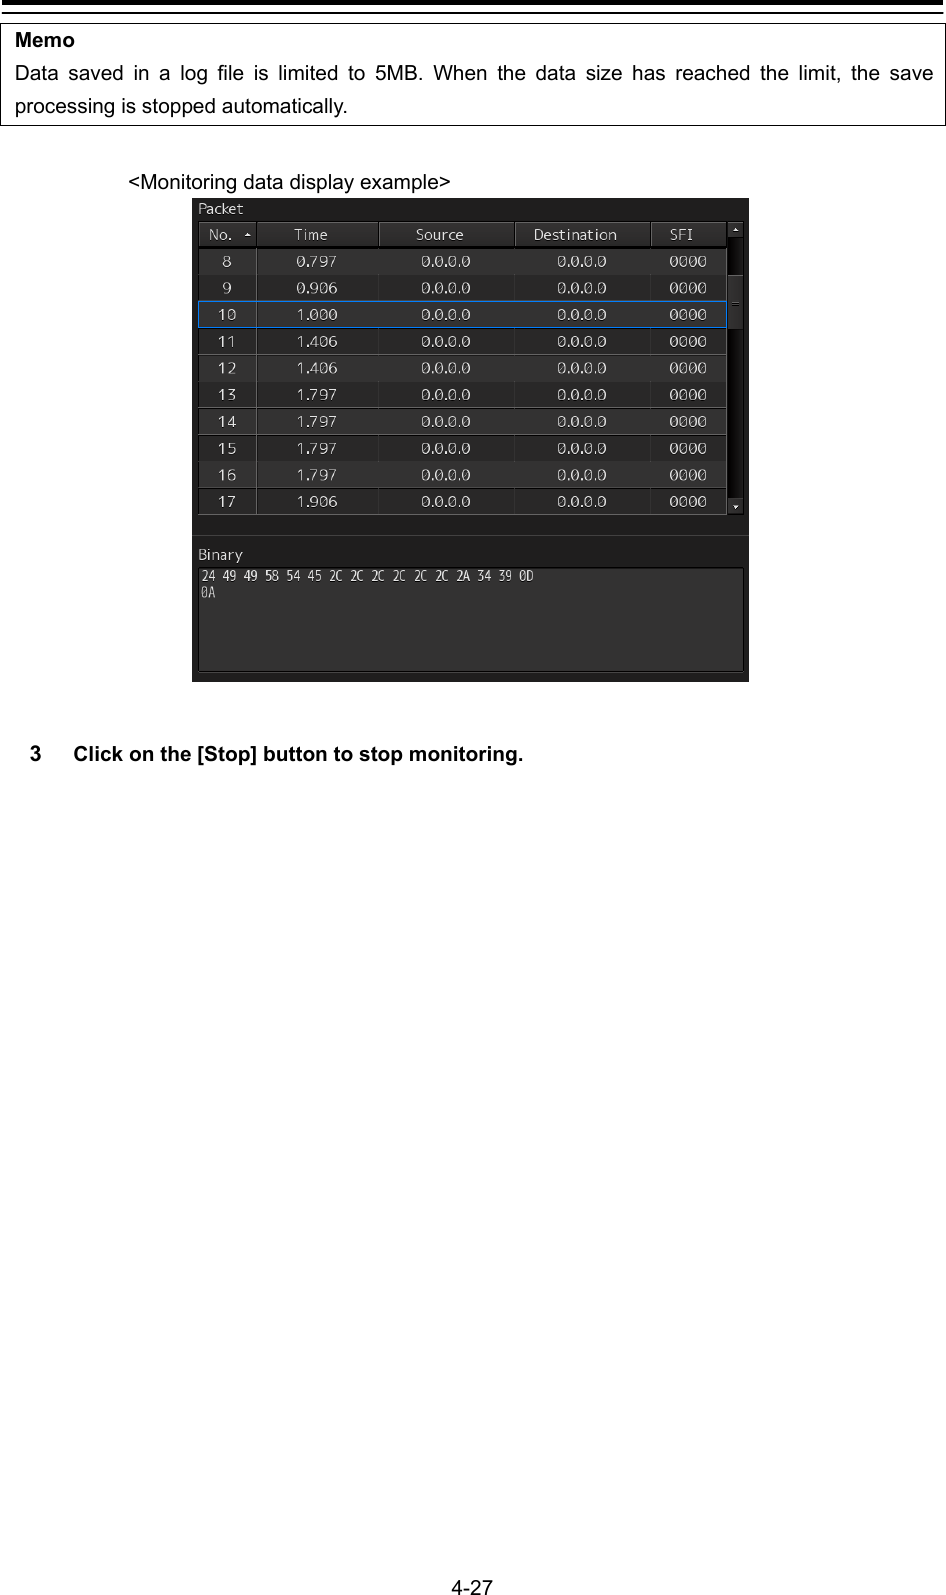   4-27 Memo Data saved in a log file is limited to 5MB. When the data size has reached the limit, the save processing is stopped automatically.  &lt;Monitoring data display example&gt;   3  Click on the [Stop] button to stop monitoring.   